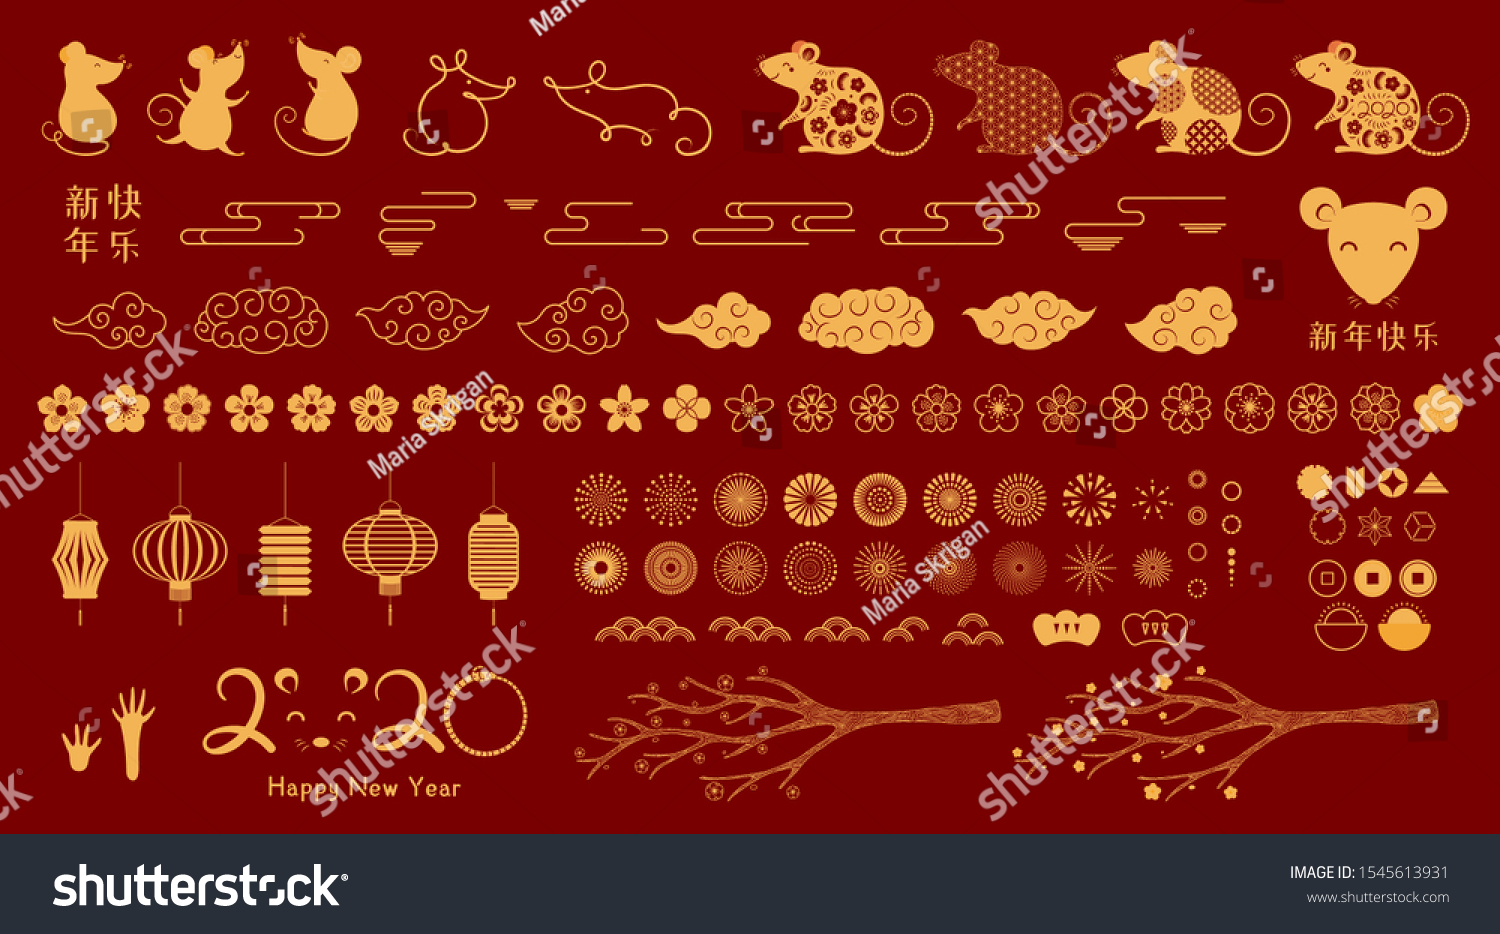 Set of gold decorative elements in asian style with rats, paw prints, clouds, lanterns, flowers, tree branch, fireworks, Chinese text Happy New Year. Isolated objects. Hand drawn vector illustration. #1545613931